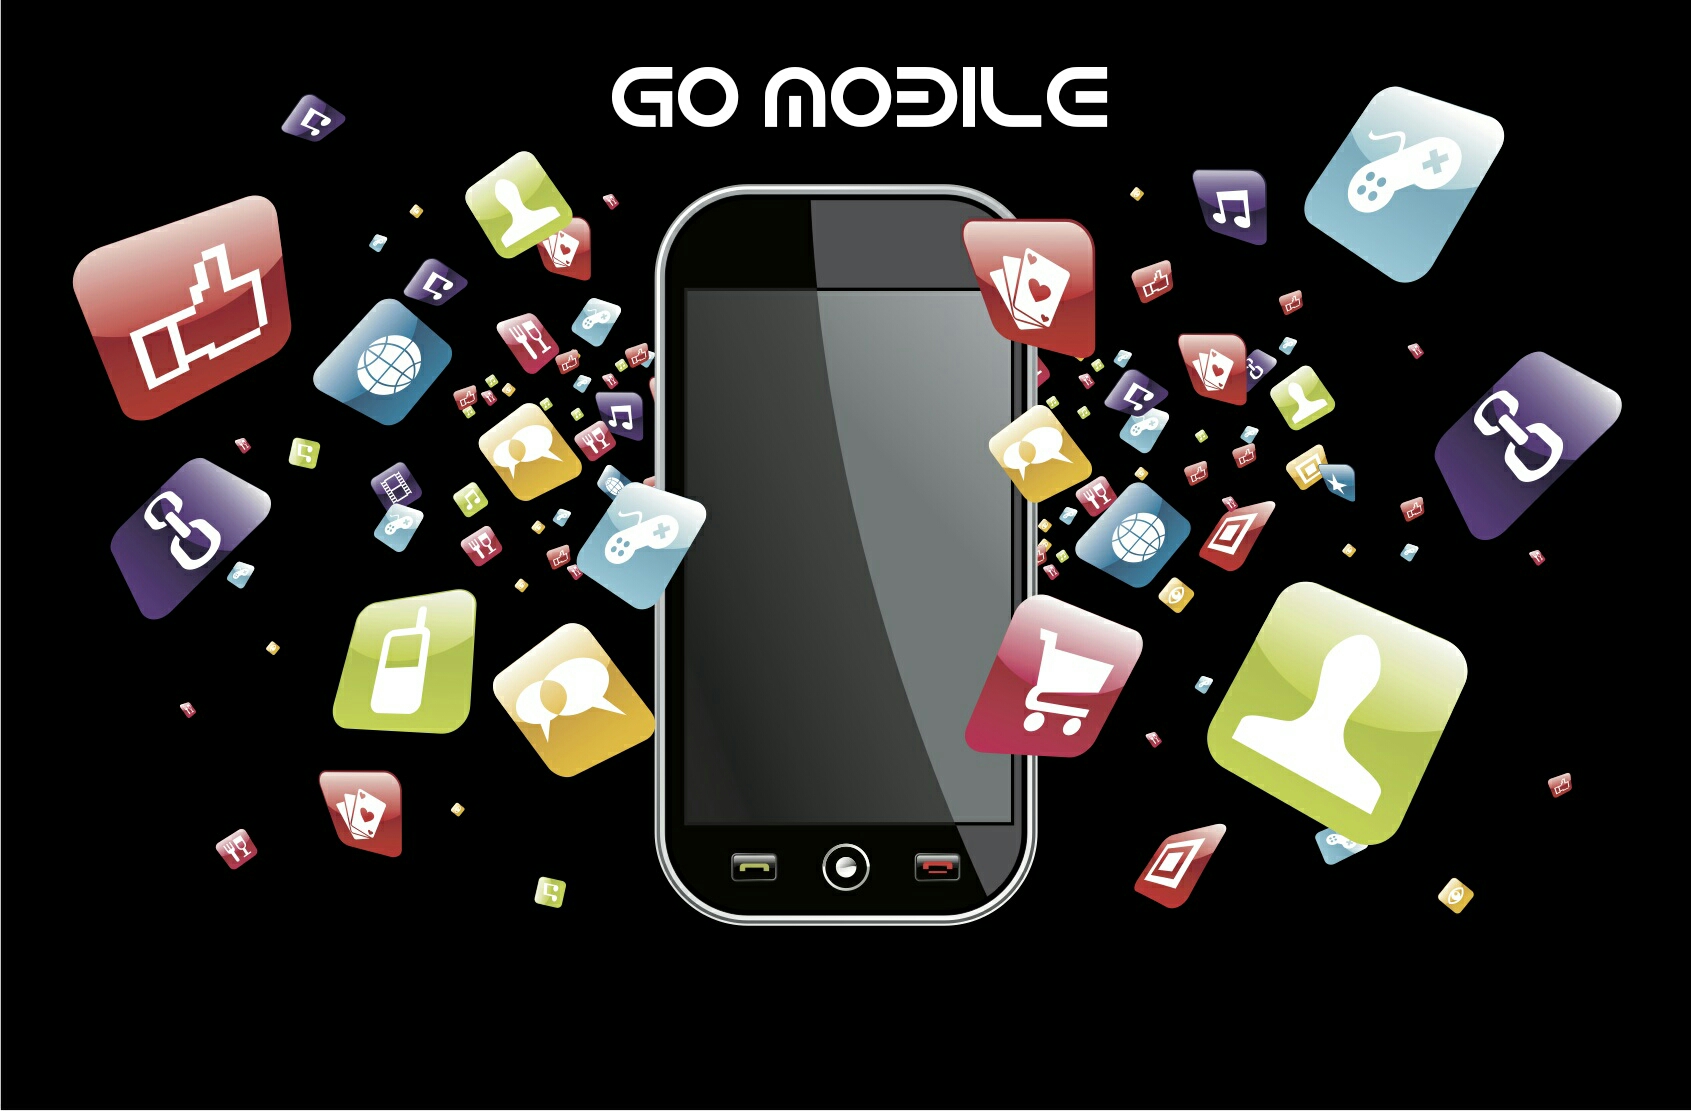 Want New Members? Go Mobile!